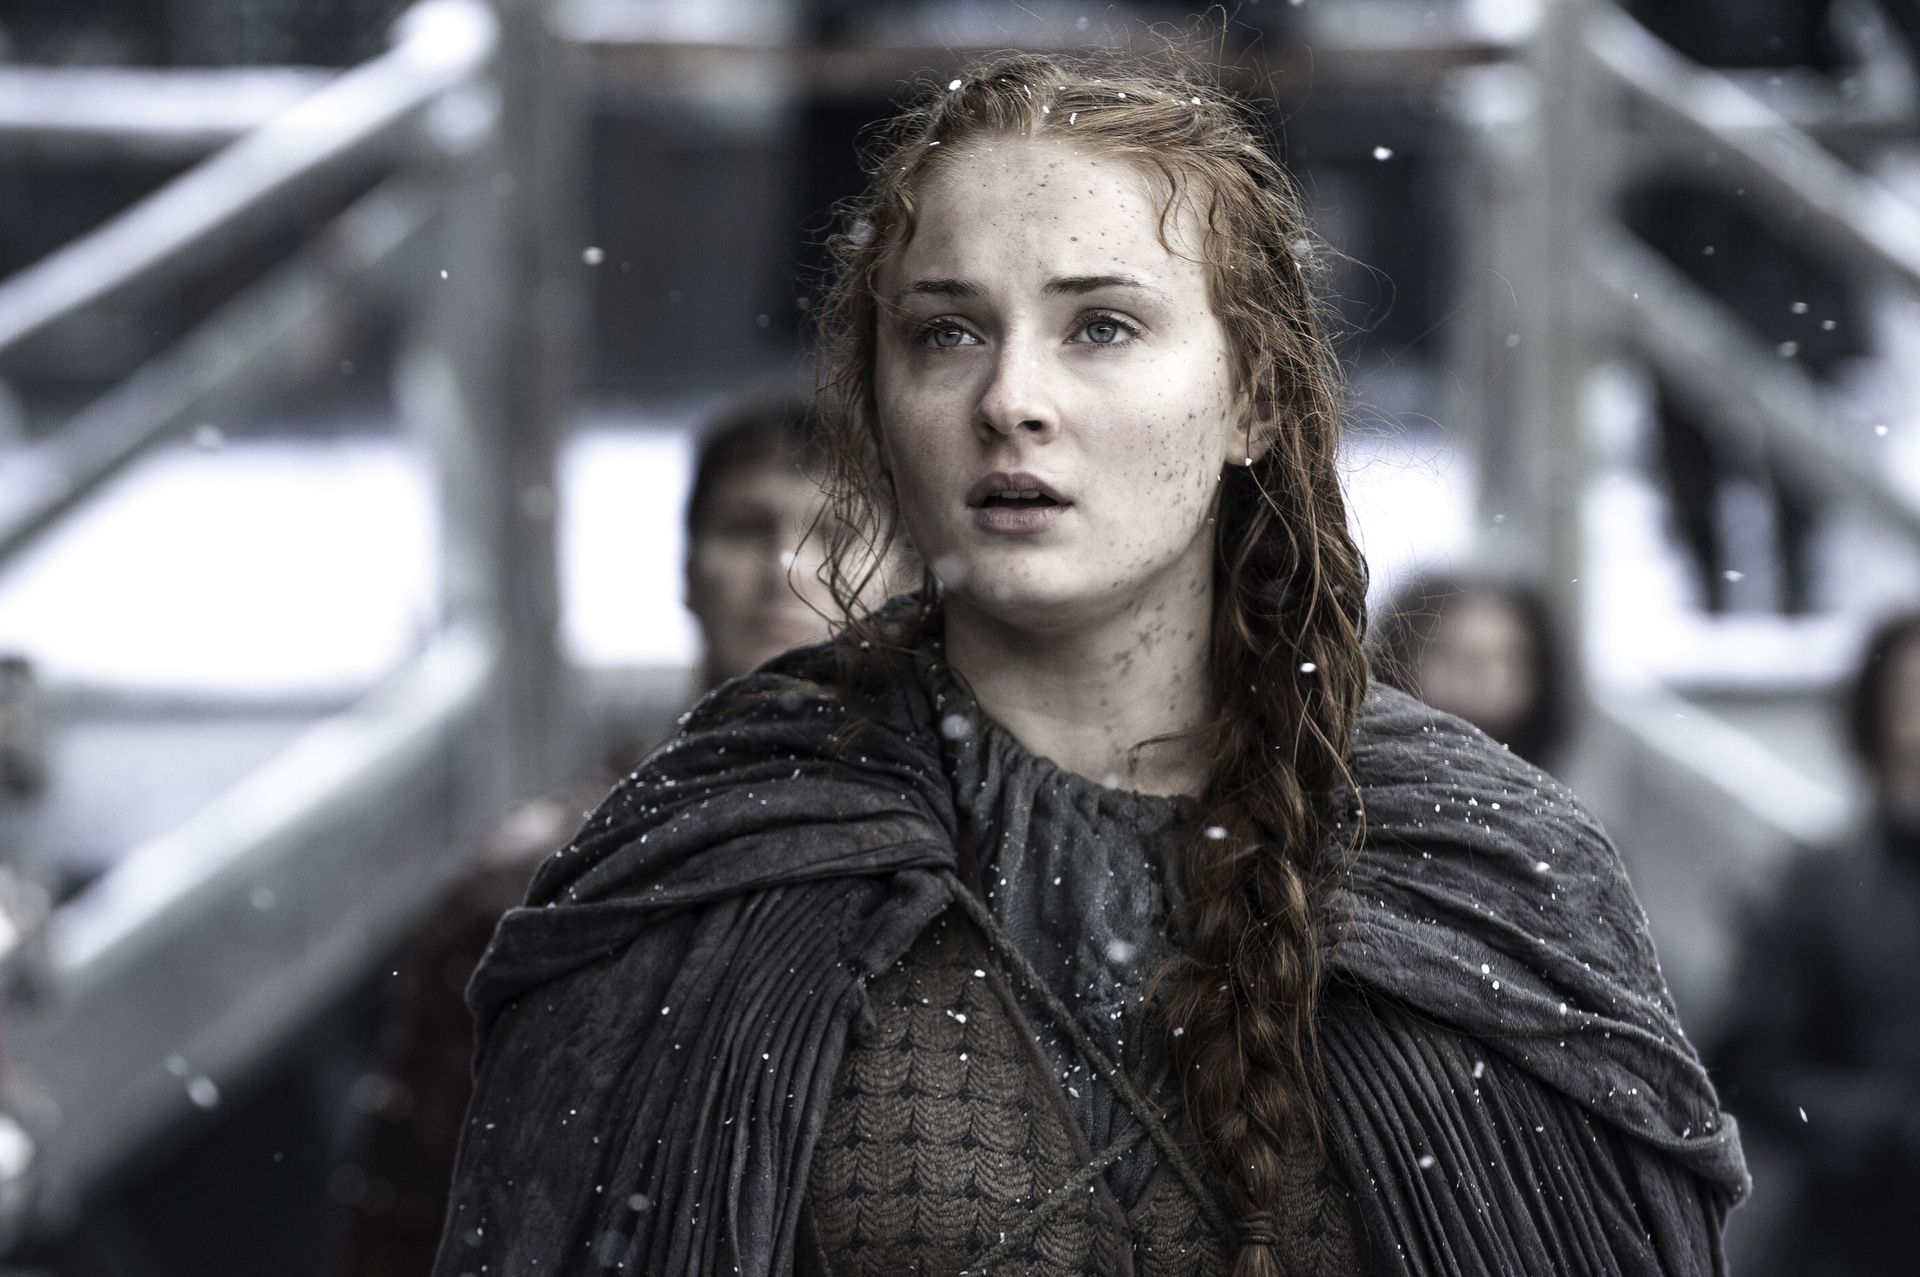 Sansa Stark from Game of Thrones, looking upwards with a worried expression, wearing a textured cape and dress